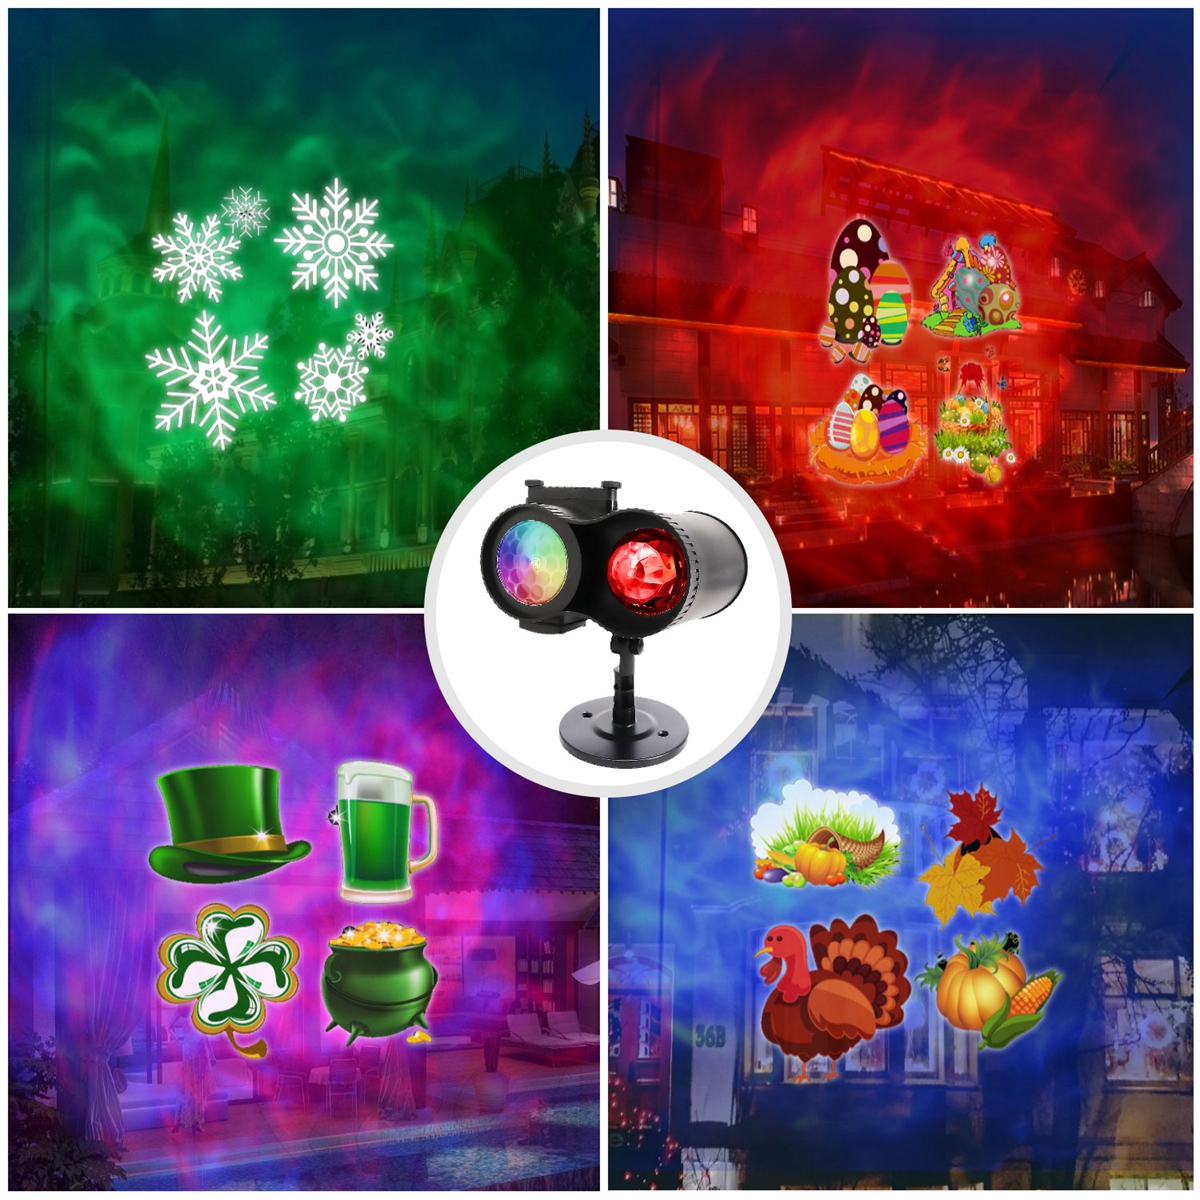 64-Patterns-LED-Christmas-Snowflake-Projector-Light-Outdoor-Lawn-Lamp-Waterproof-1619615-6